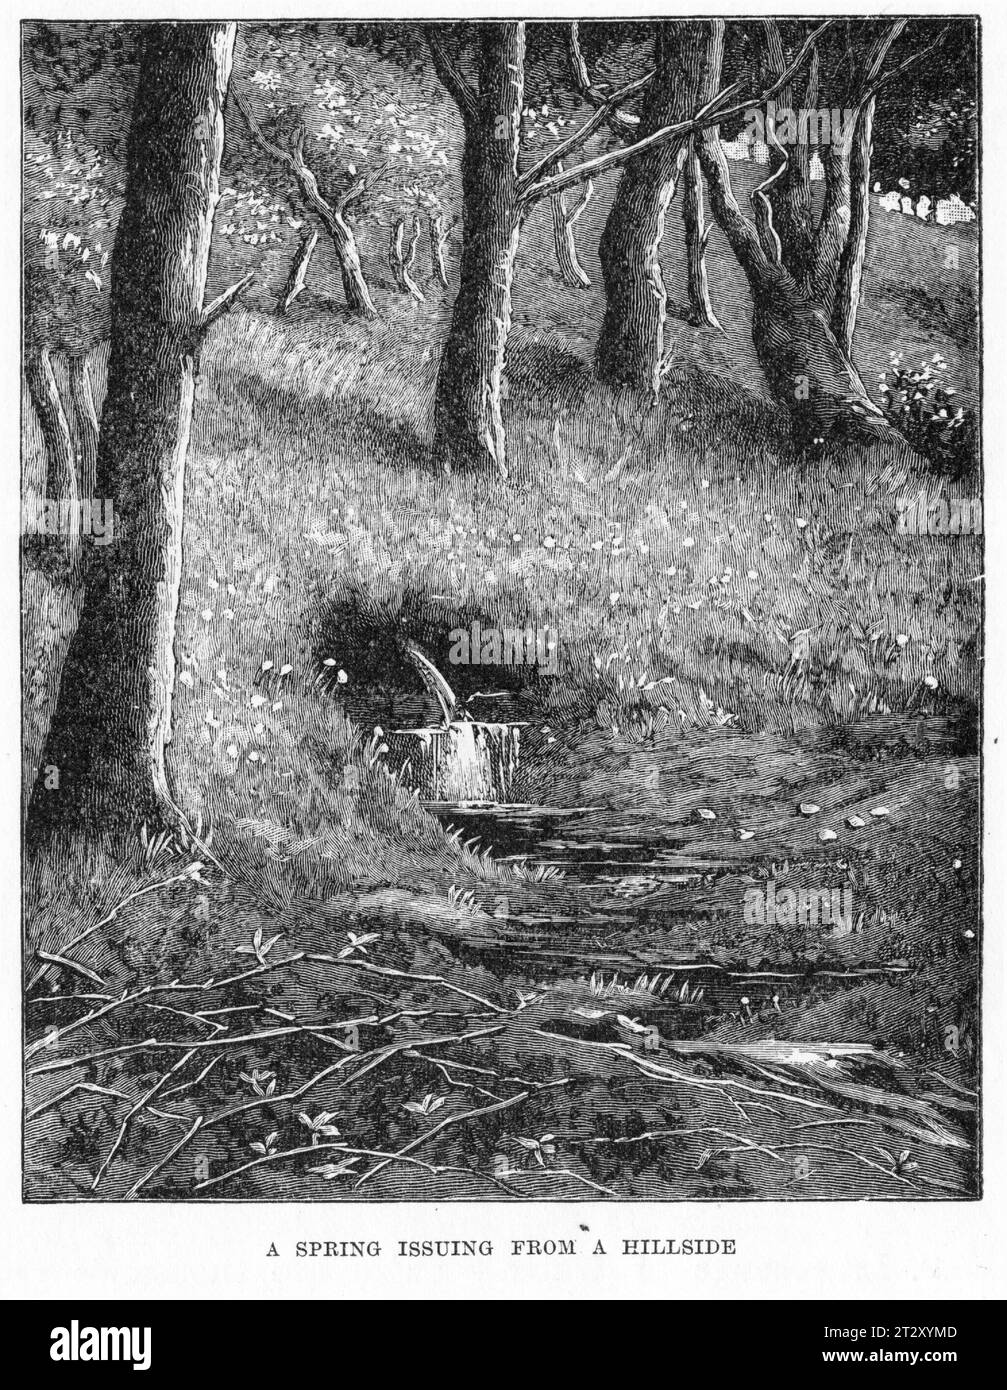 Engraved illustration from a geography book showing a spring issuing from a hillside, circa 1900 Stock Photo